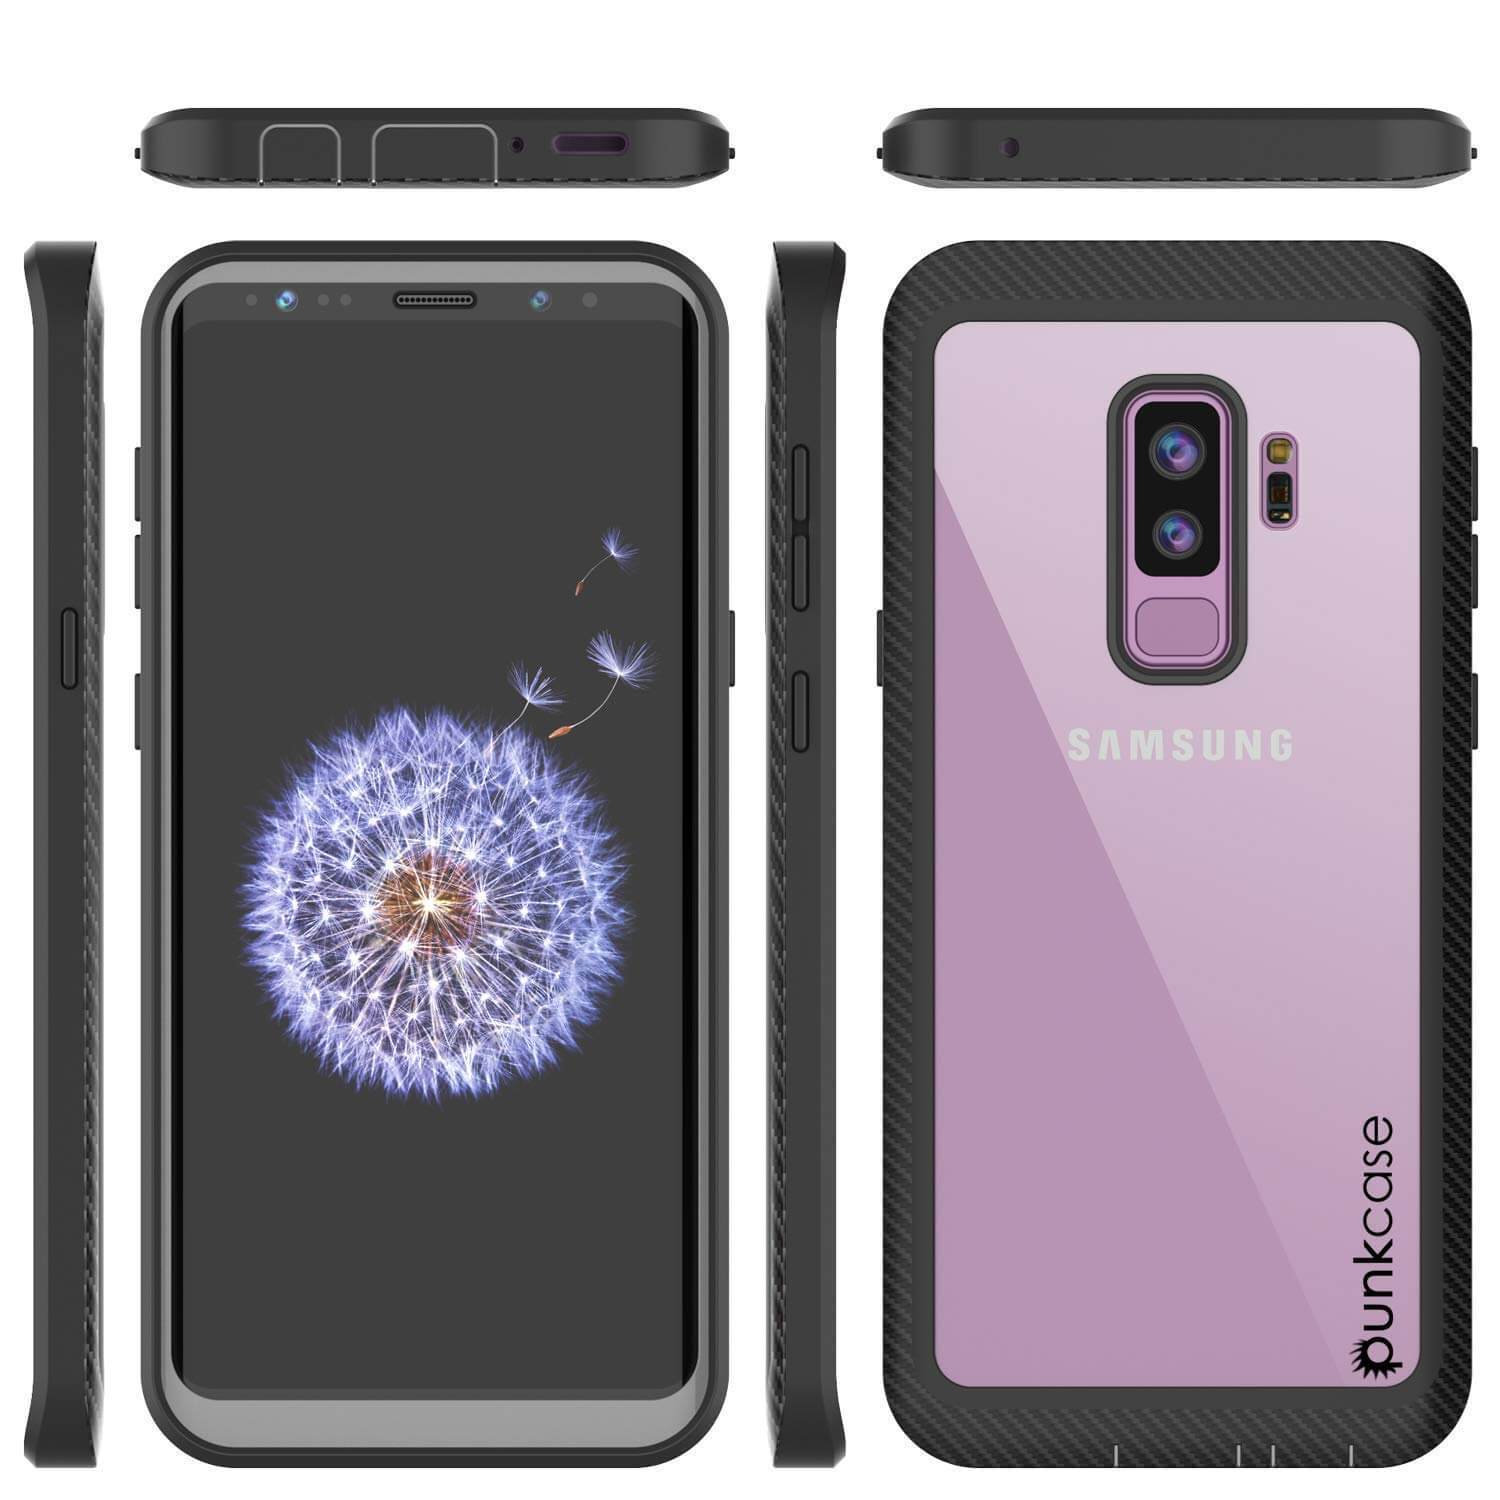 PunkCase Galaxy S9+ Plus Case, [Spartan Series] Clear Rugged Heavy Duty Cover W/Built in Screen Protector [Black]